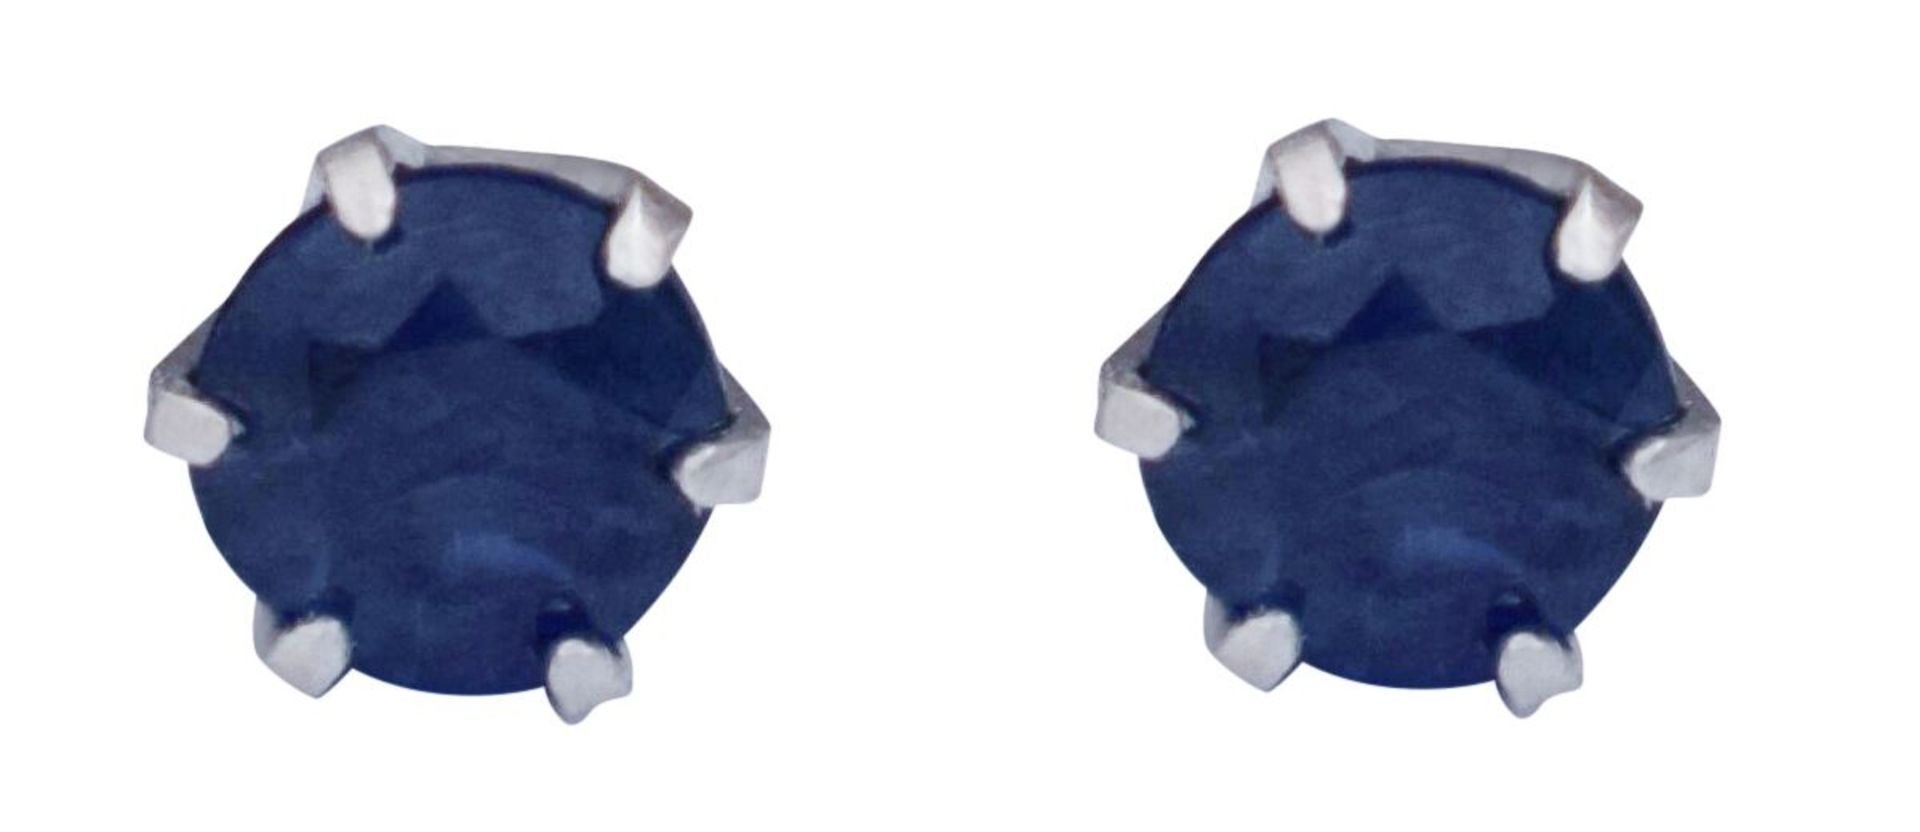 Sapphire Earrings In Platinum, Platinum 900 RRP £229 Weight 0.59g, Diamond Weight 0.2ct, Colour 0.